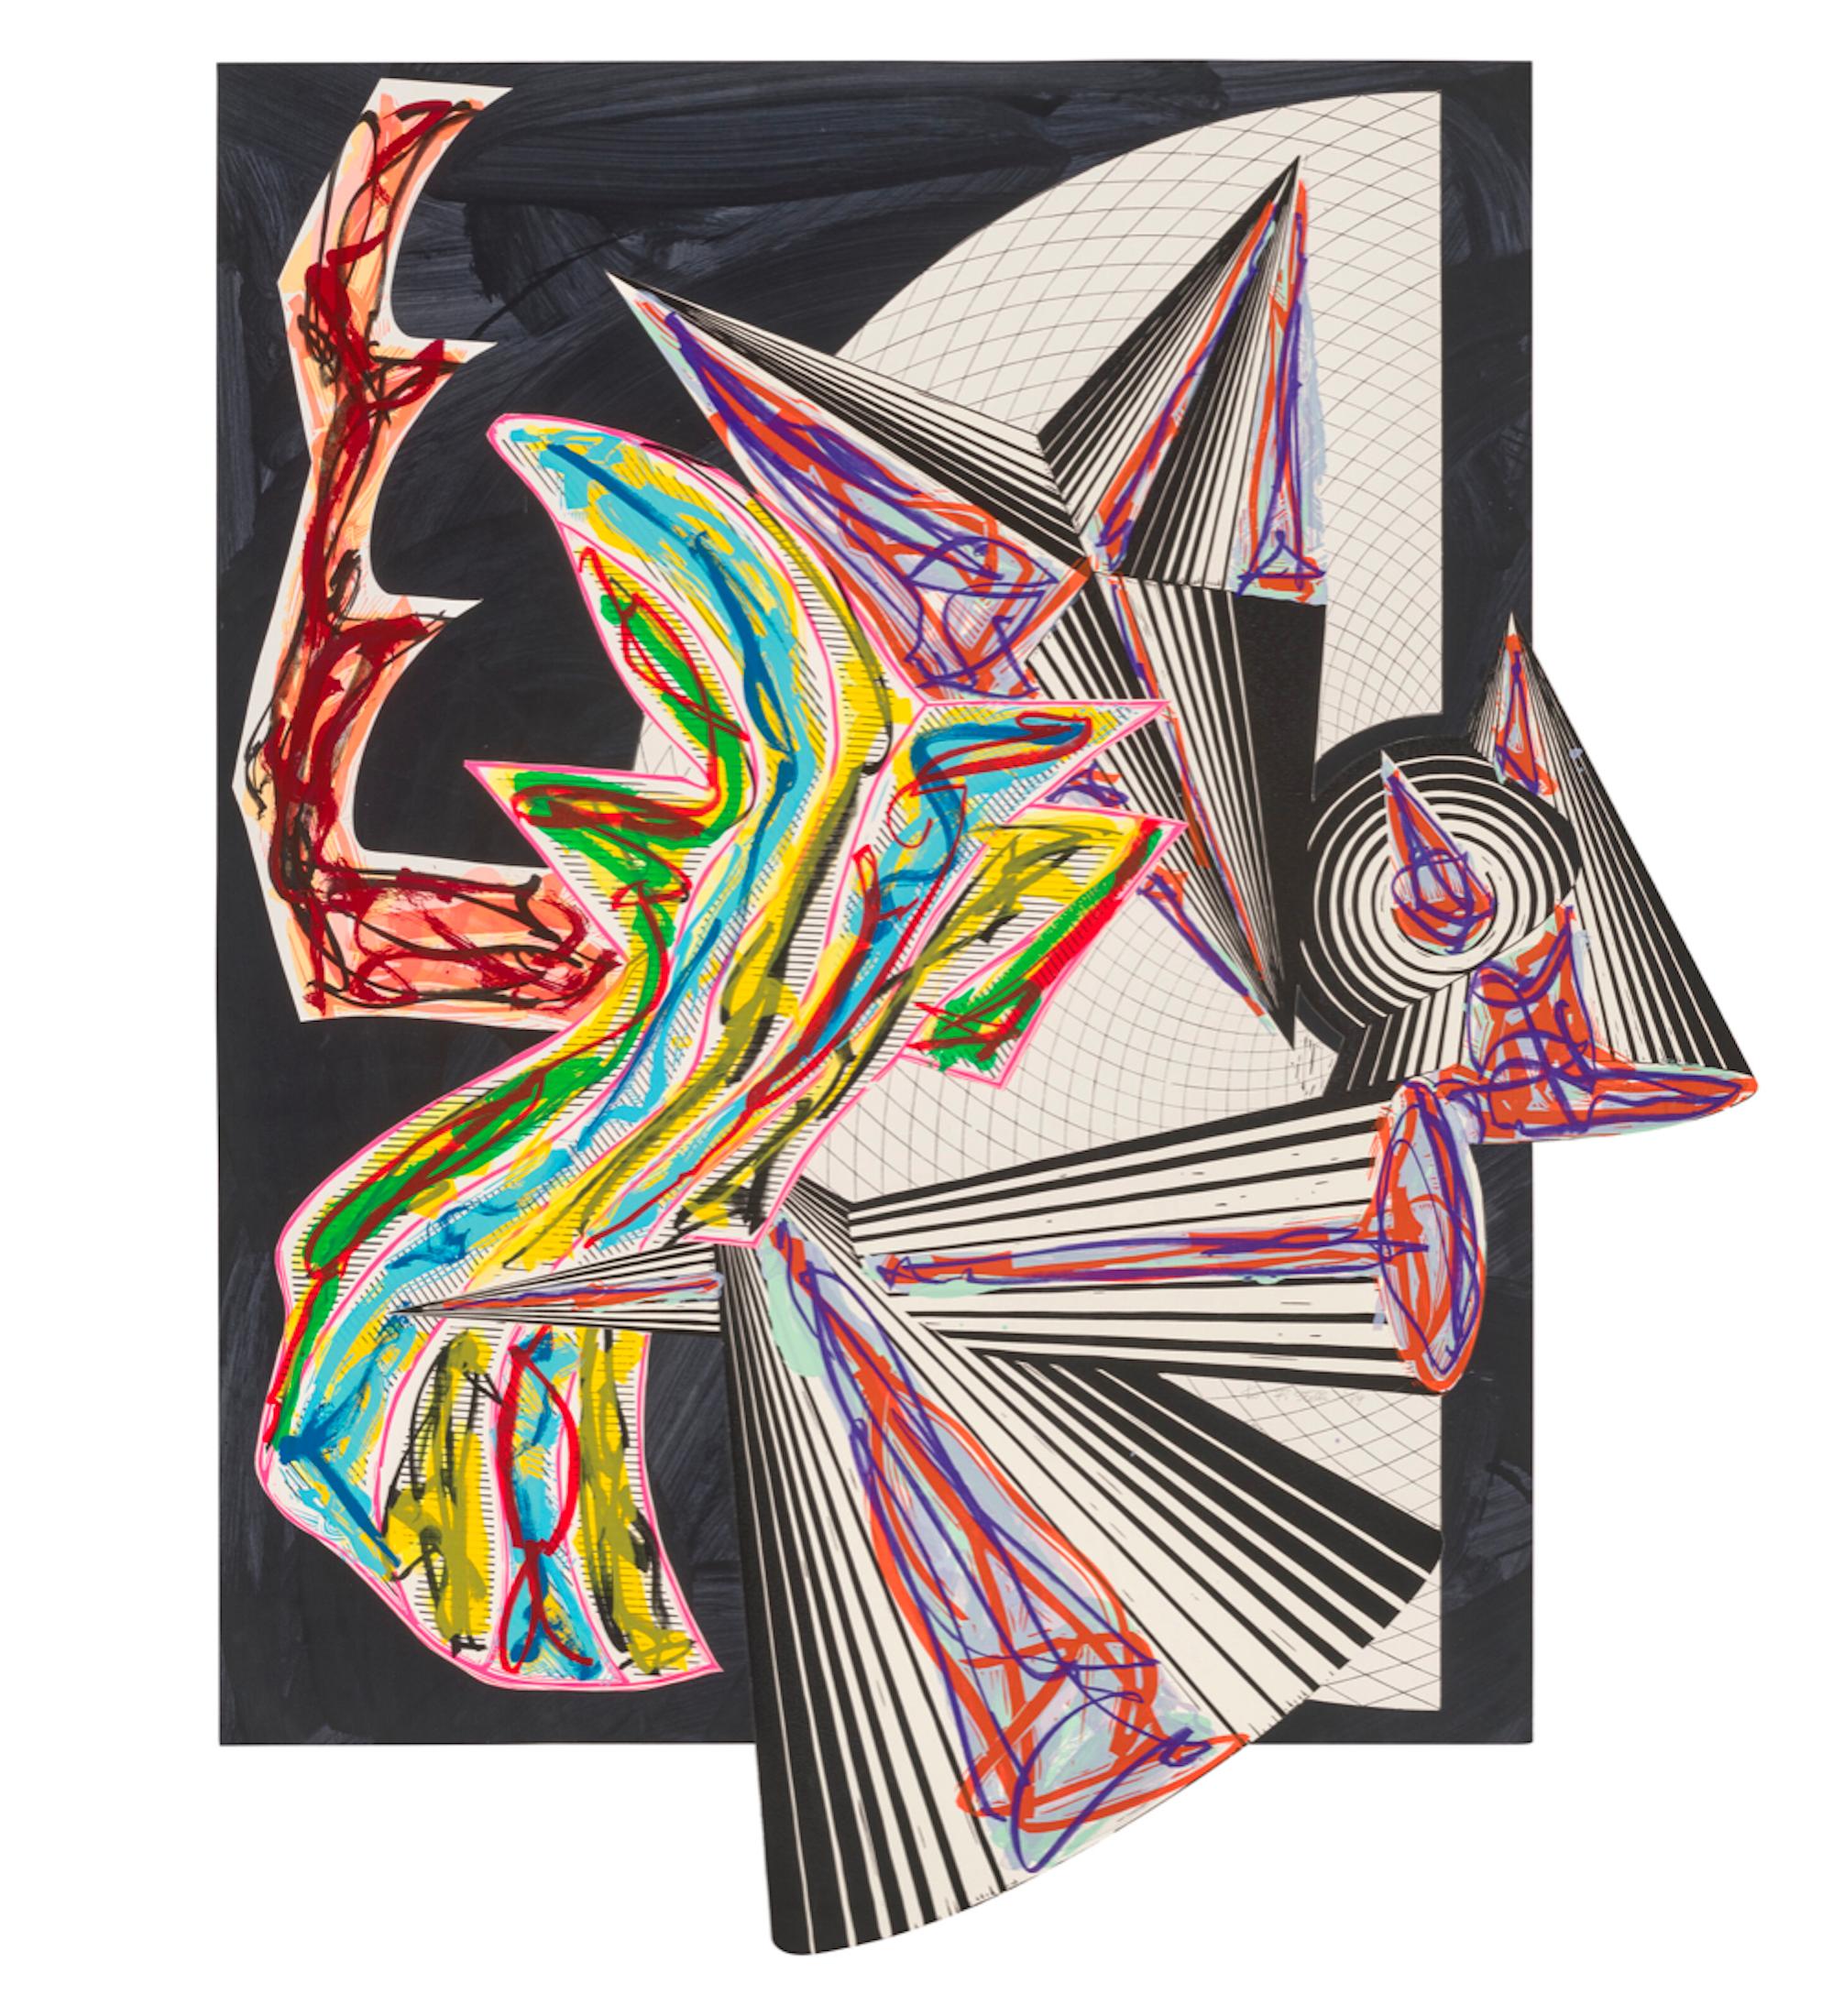 FRANK STELLA (1936-Present)

From: Illustrations After El Lissitzky's Had Gadya. Lithograph, linocut and screenprint in colours with collage and hand-colouring, 1984, on T.H. Saunders and Somerset papers, signed and dated in pencil, numbered 1/60